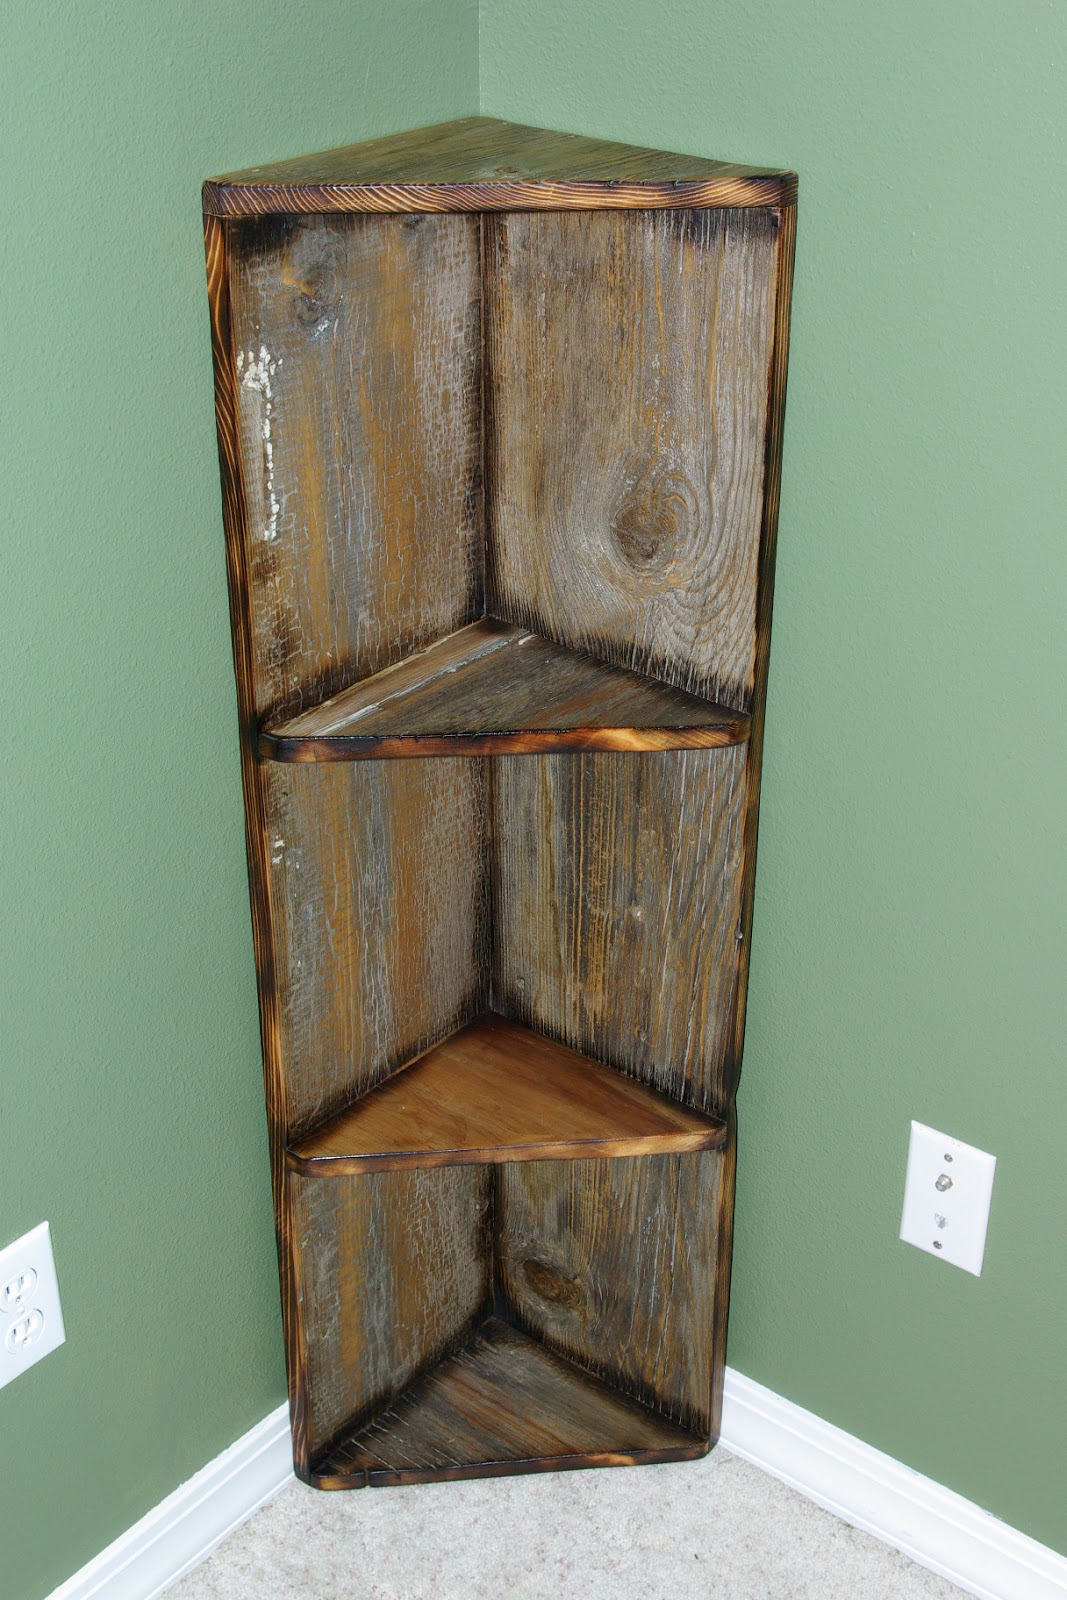 Easy to place decorative corner shelf. This can be built to the size 